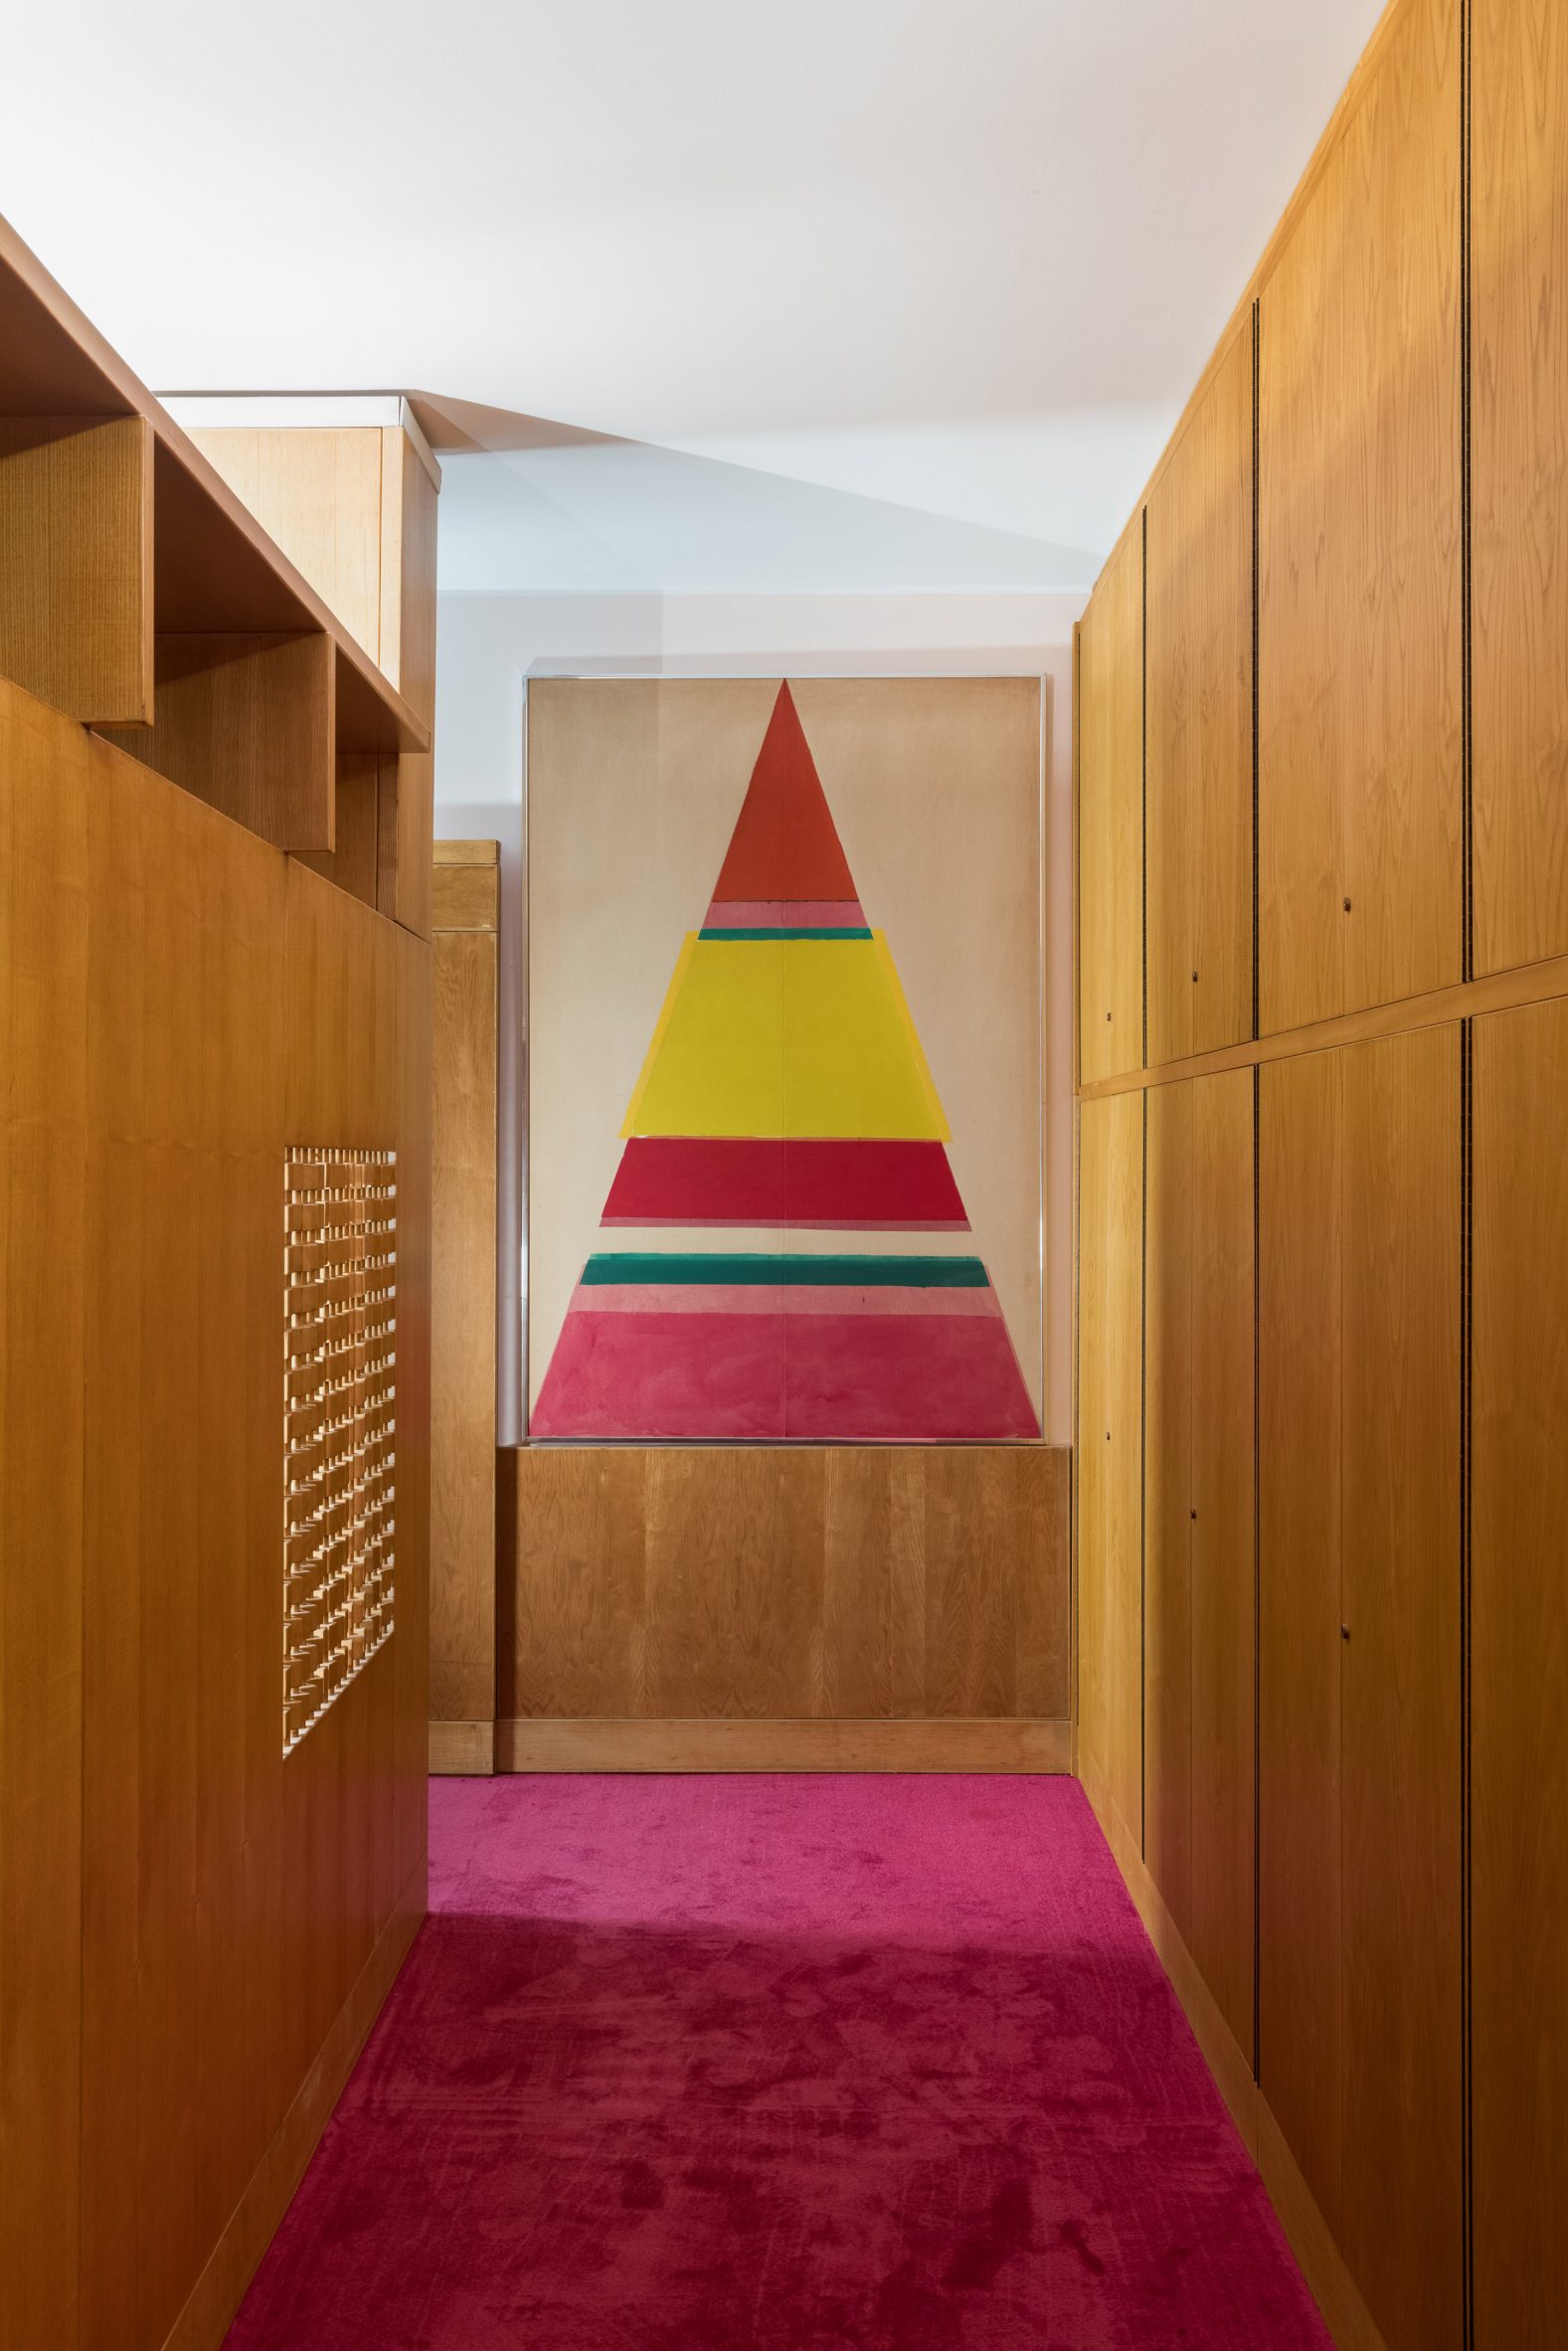 Wood-panelled corridor with magenta carpet and artwork in living room designed by Ettore Sottsass and reconstructed at Triennale di Milano, Italy